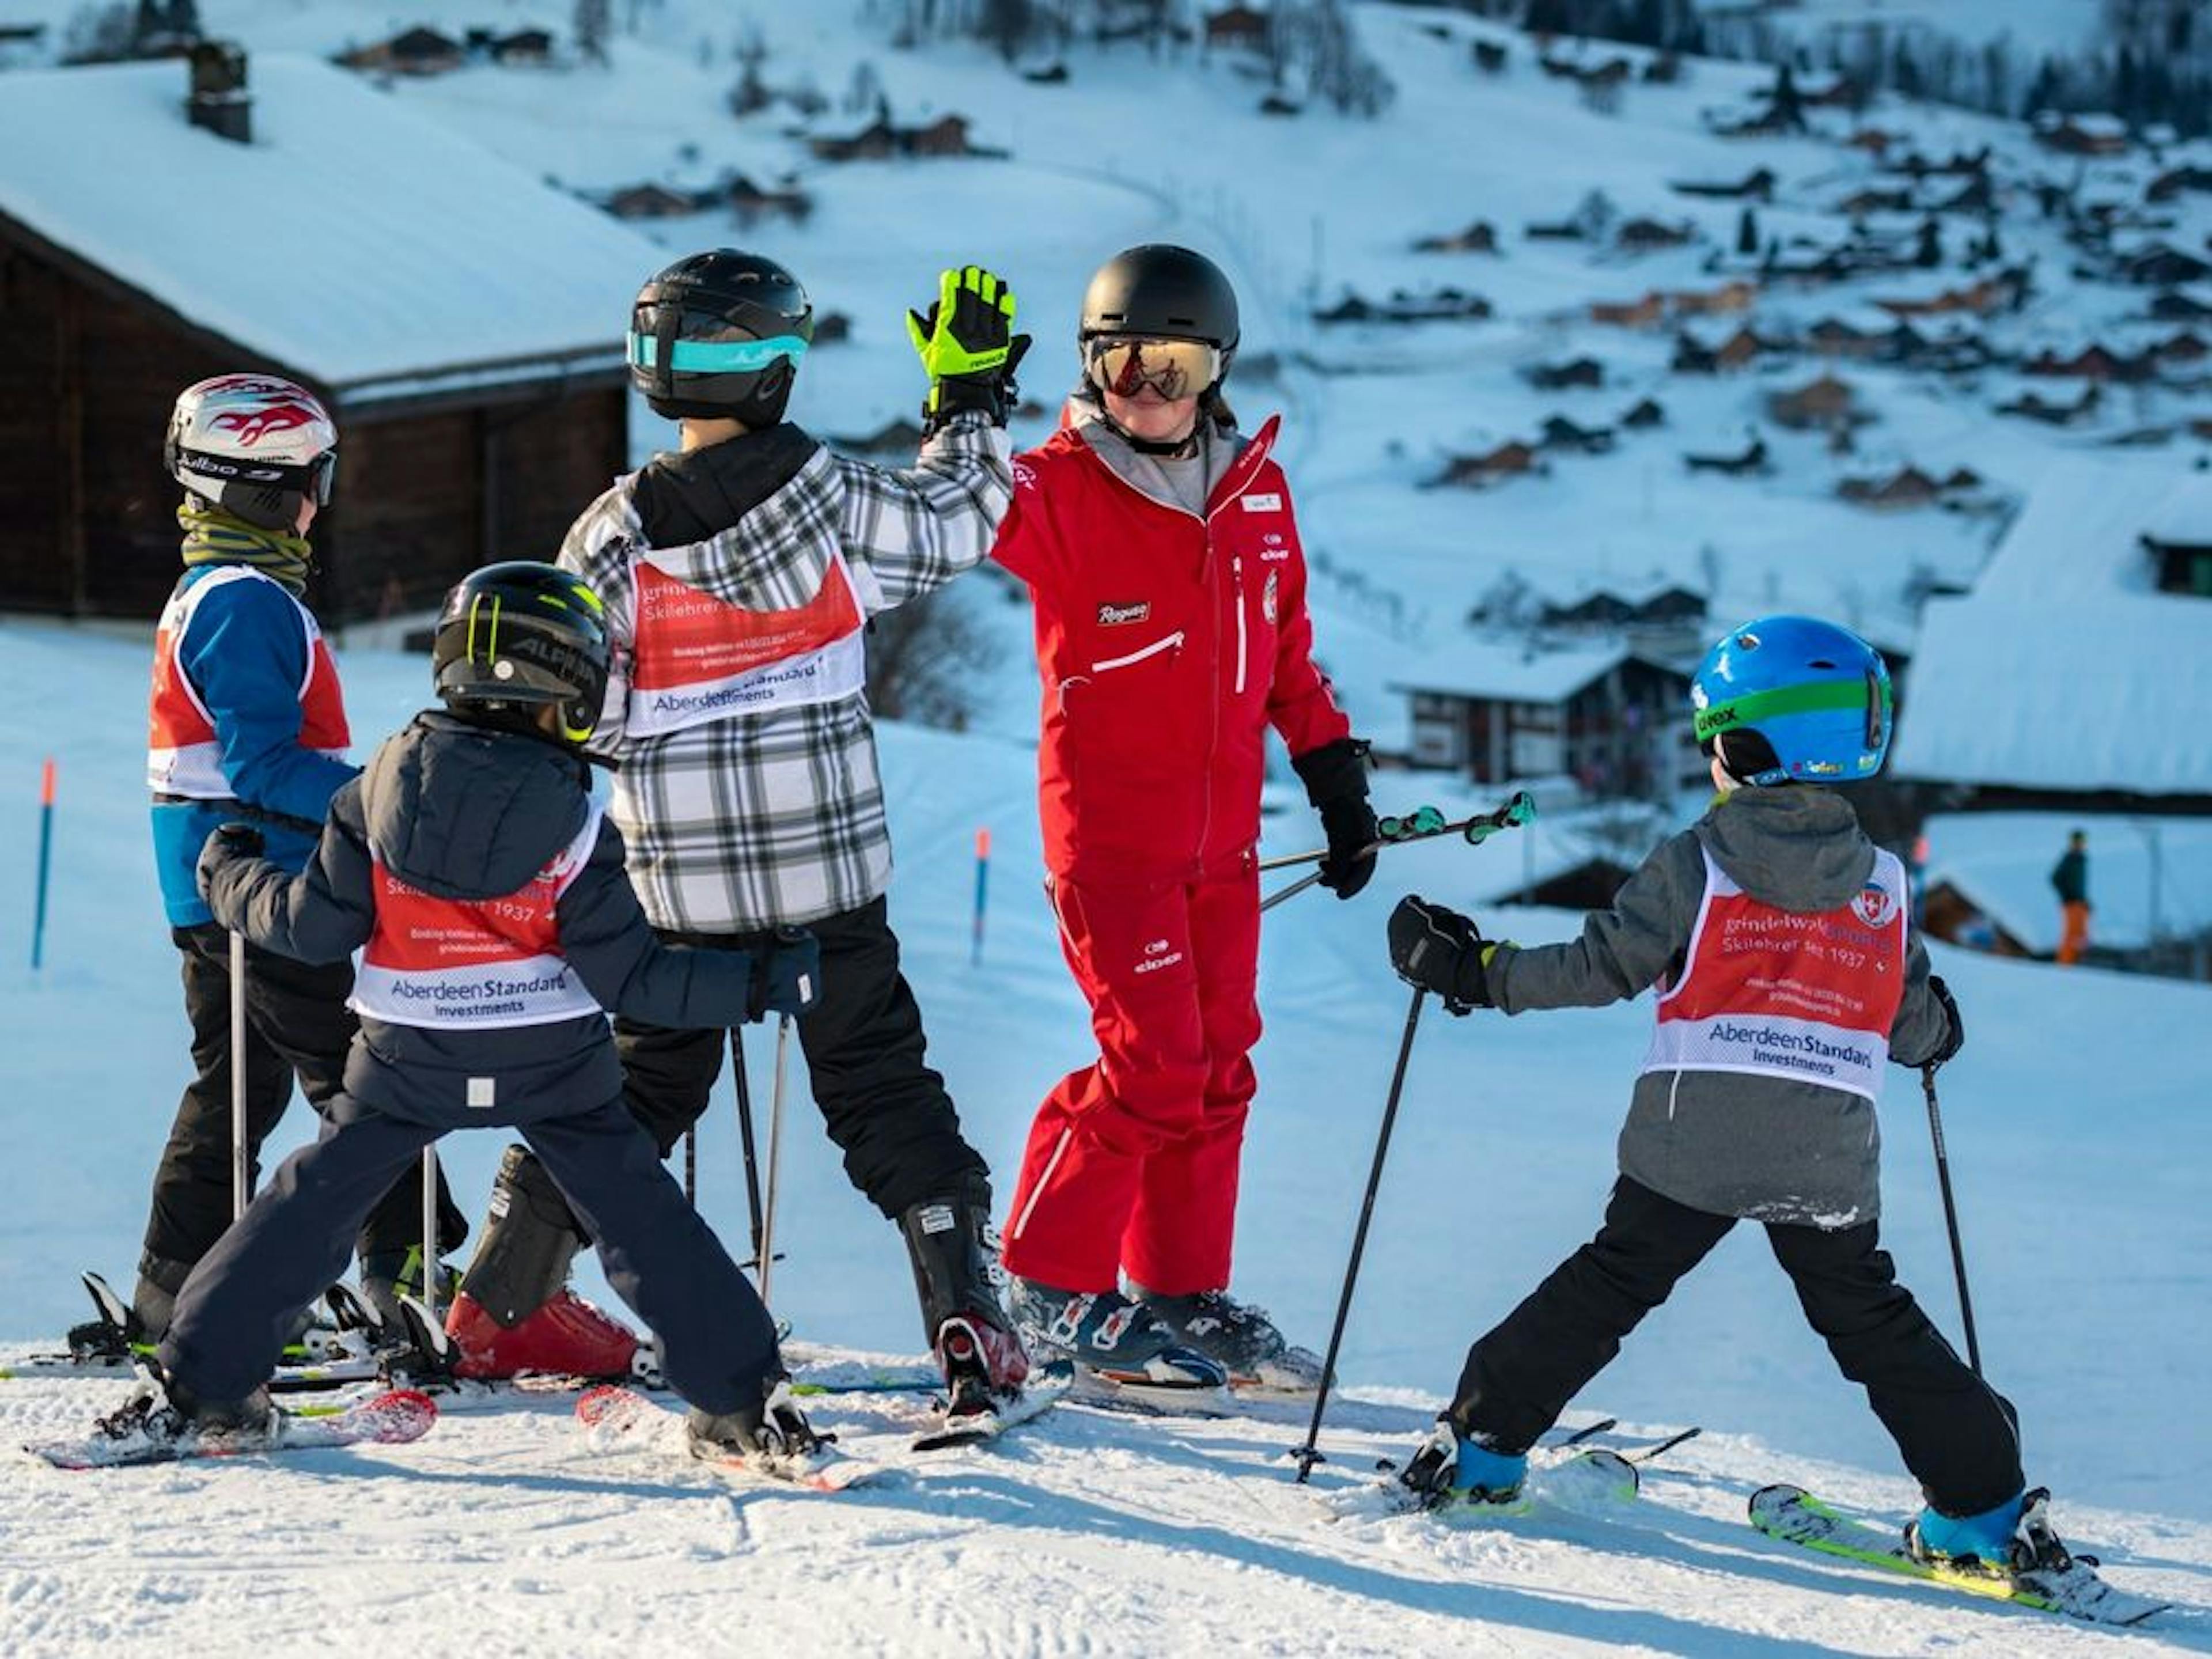 Group lessons Ski Kids First